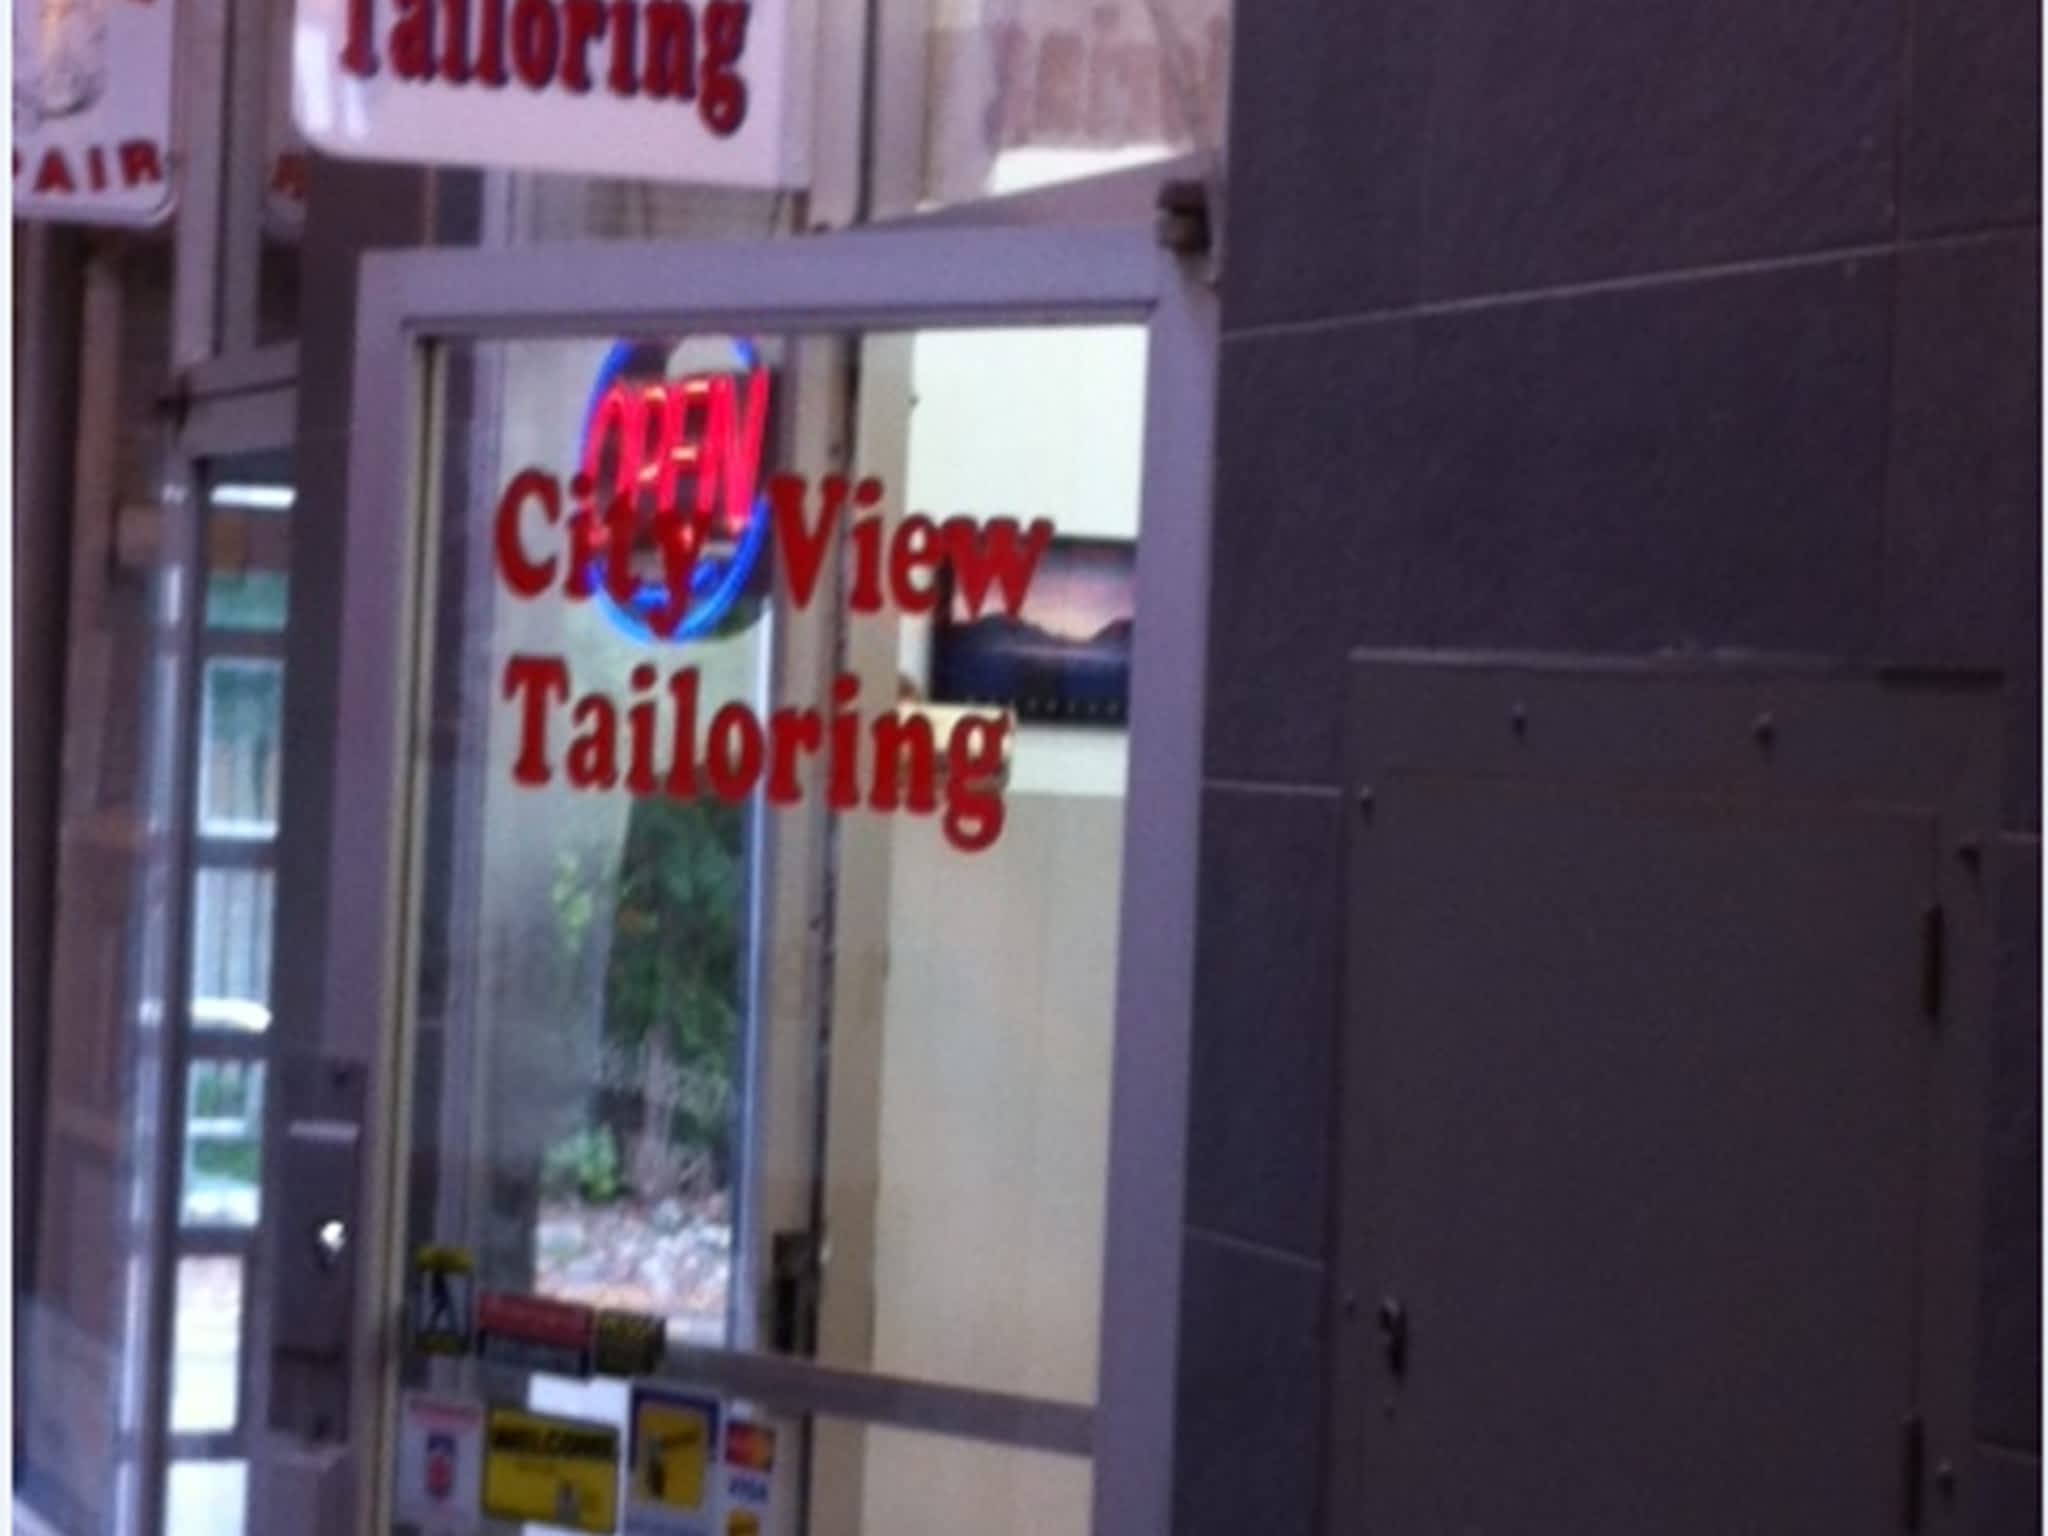 photo City View Tailoring